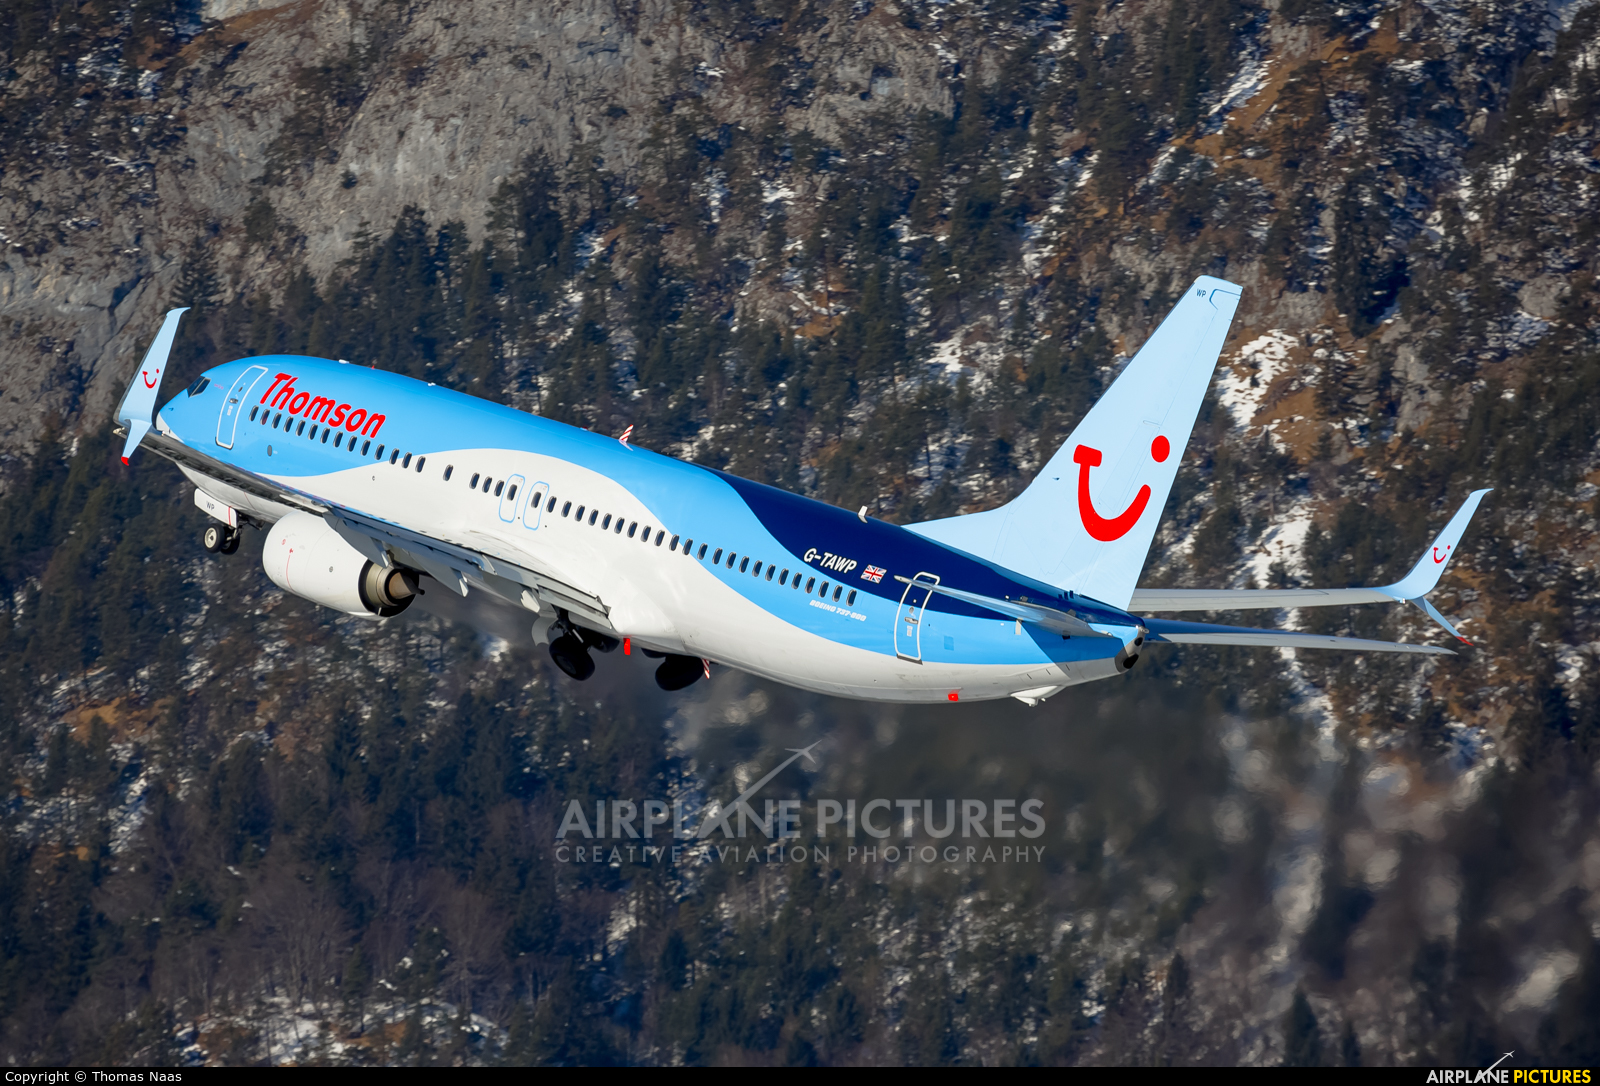 Thomson/Thomsonfly G-TAWP aircraft at Innsbruck